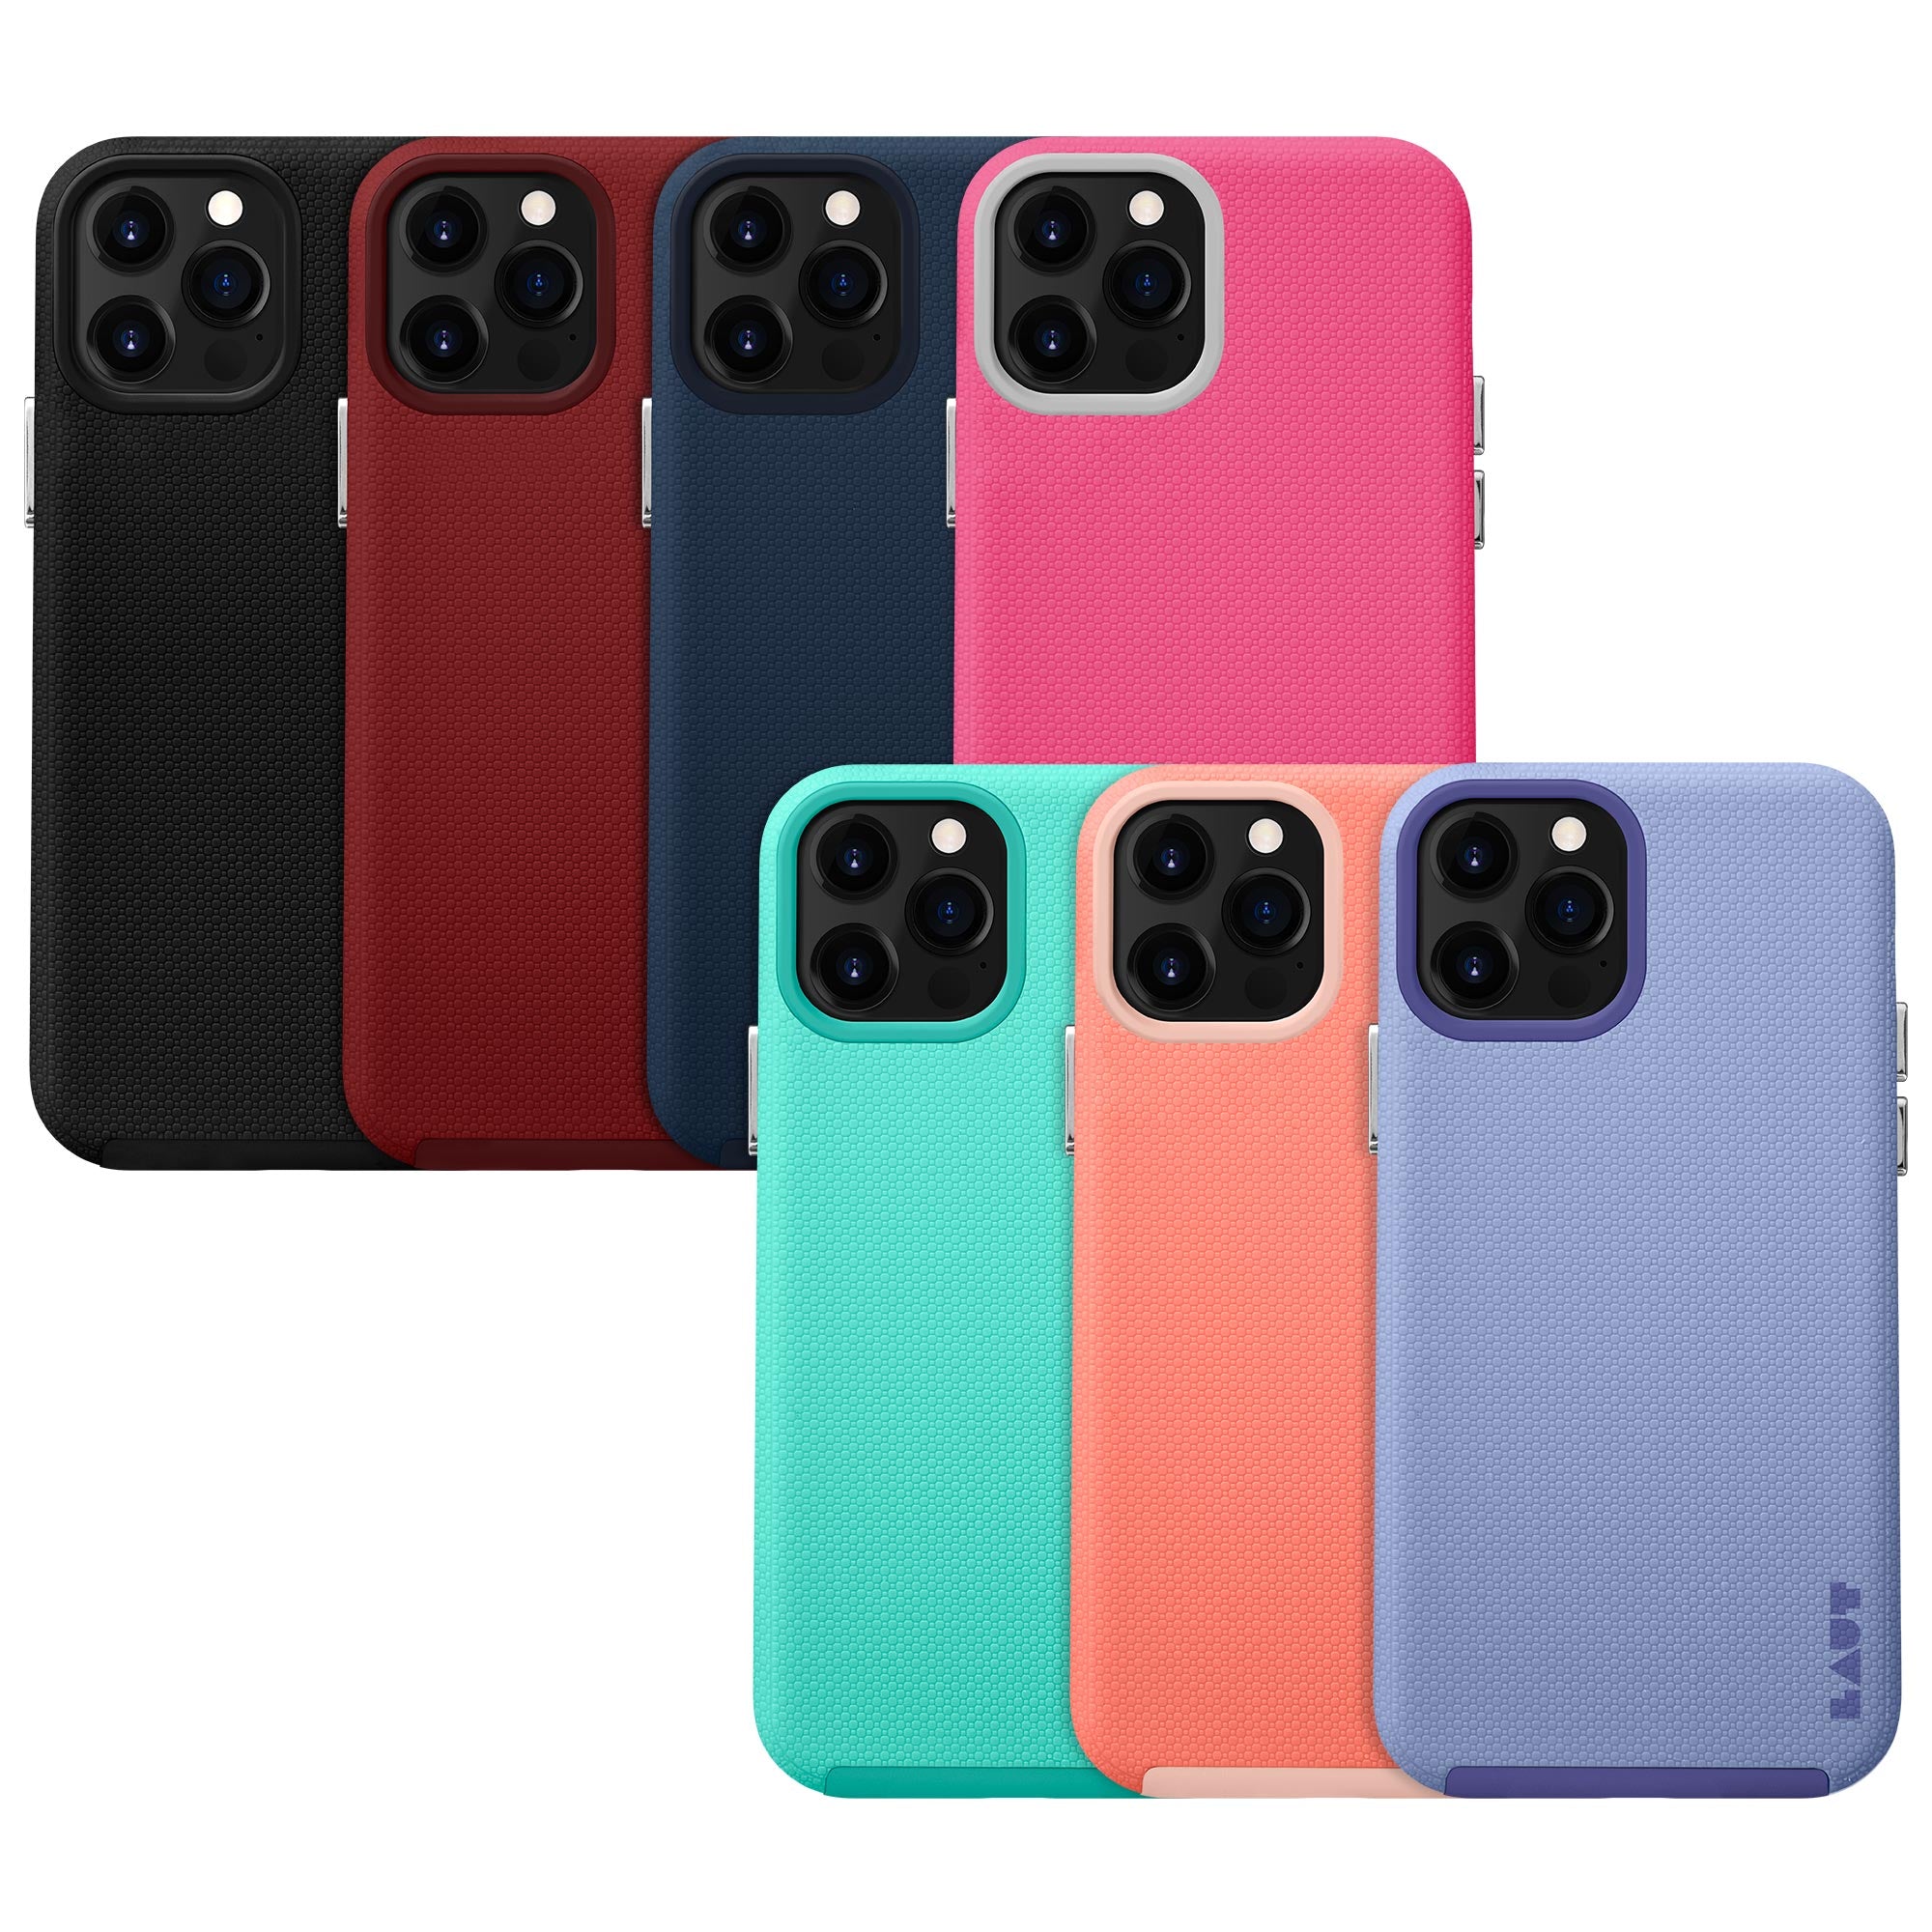 SHIELD case for iPhone 12 series